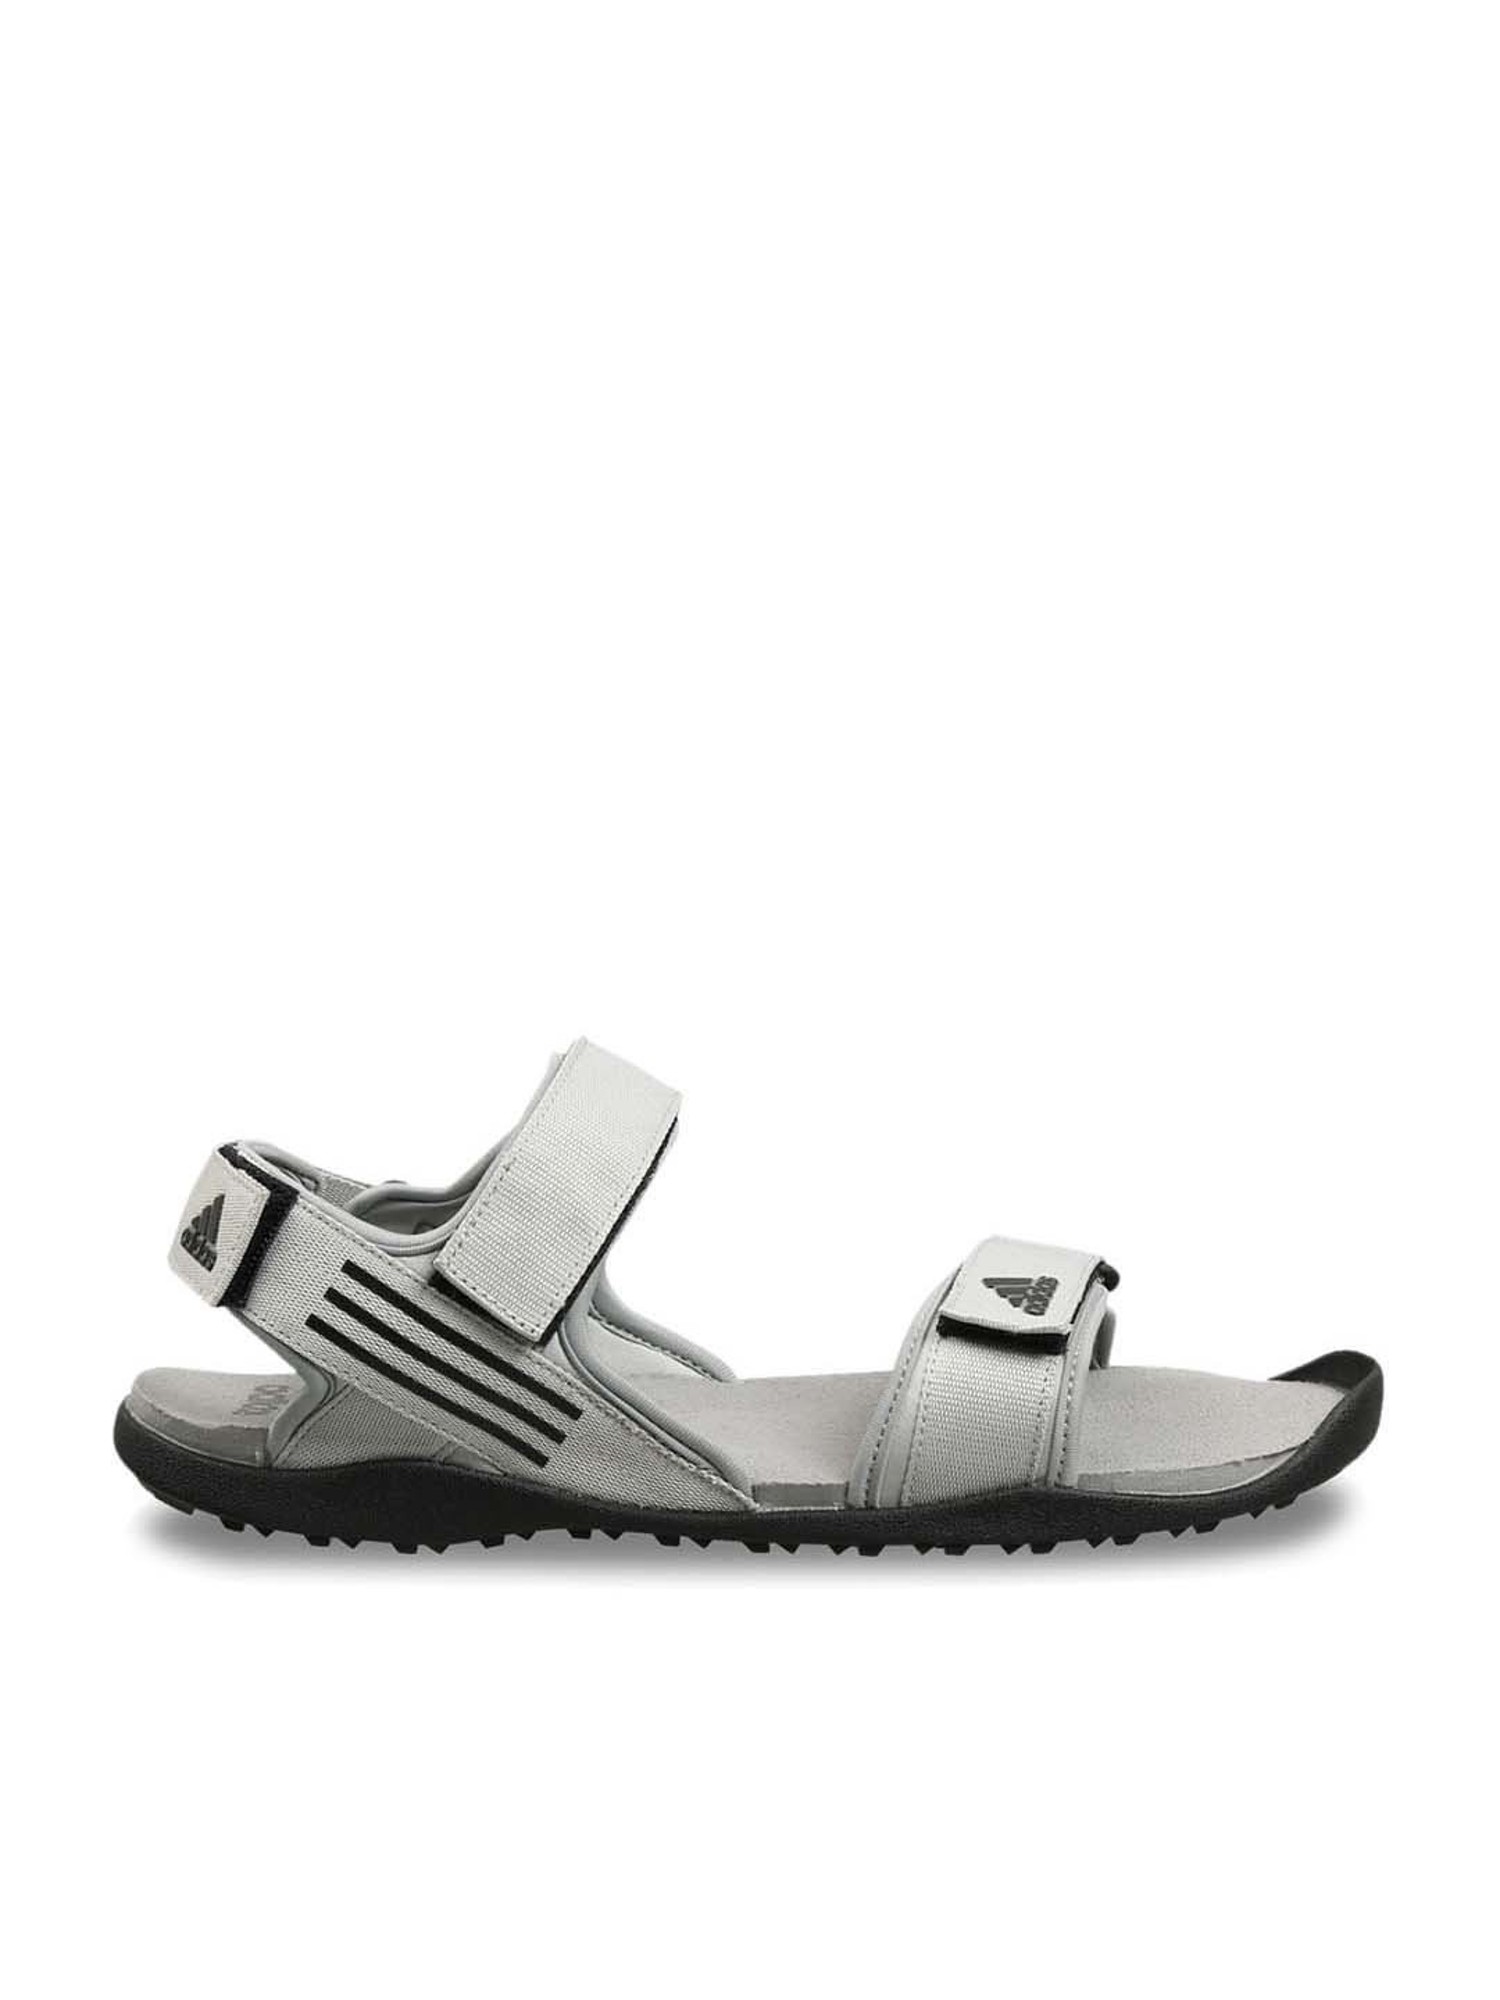 Reviewing The 8 Best Sandals For Men